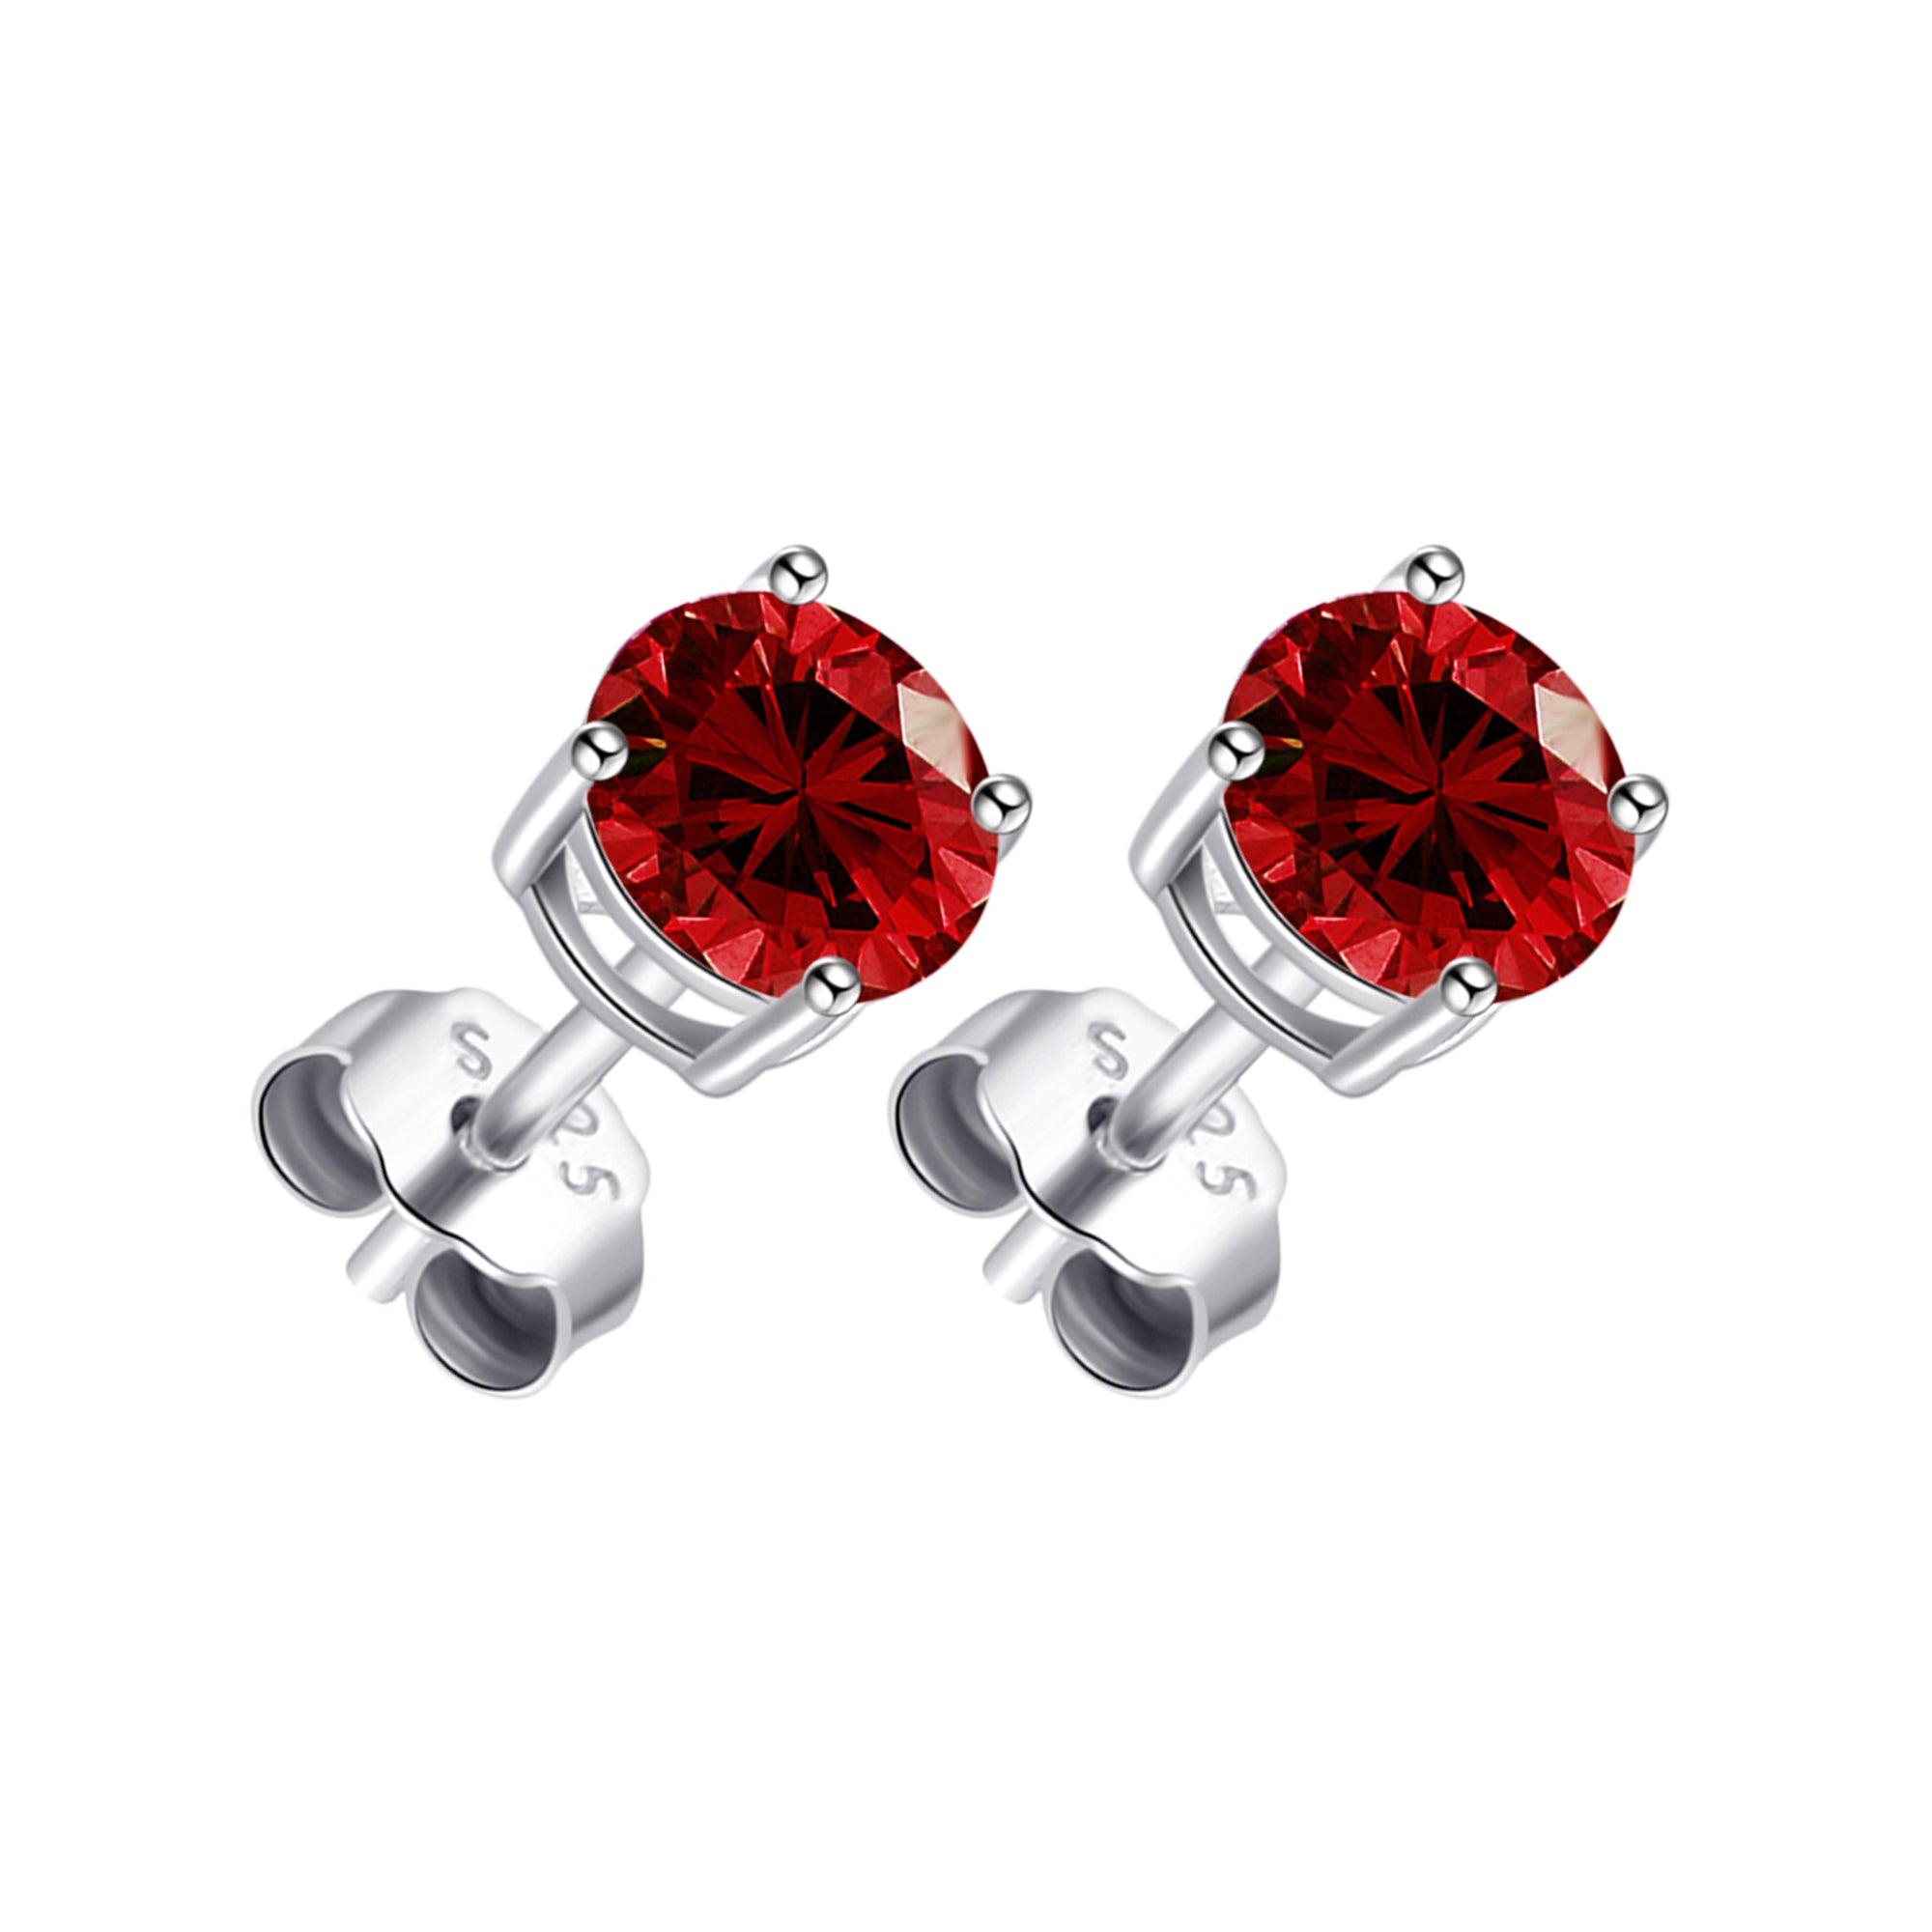 Sterling Silver Dark Red Earrings Created with Zircondia® Crystals by Philip Jones Jewellery